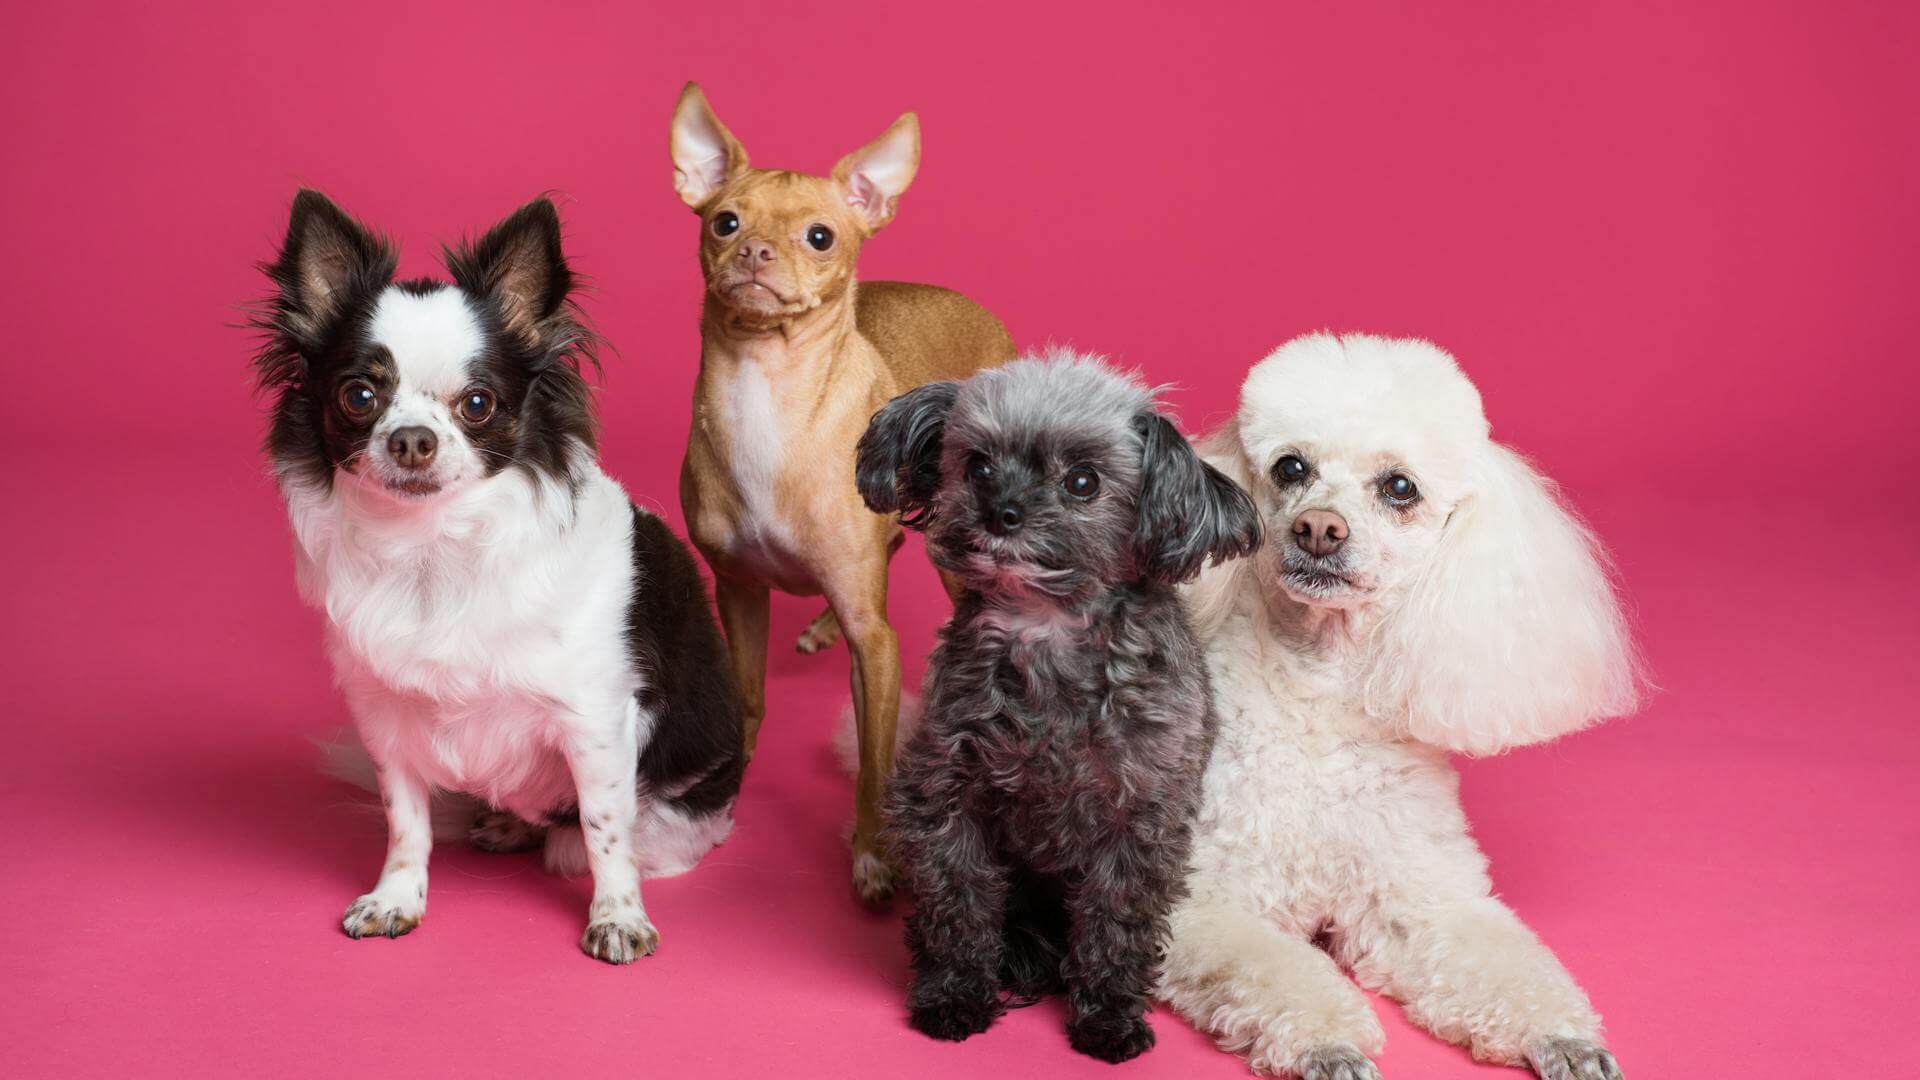 a group of dogs sitting on a pink surface